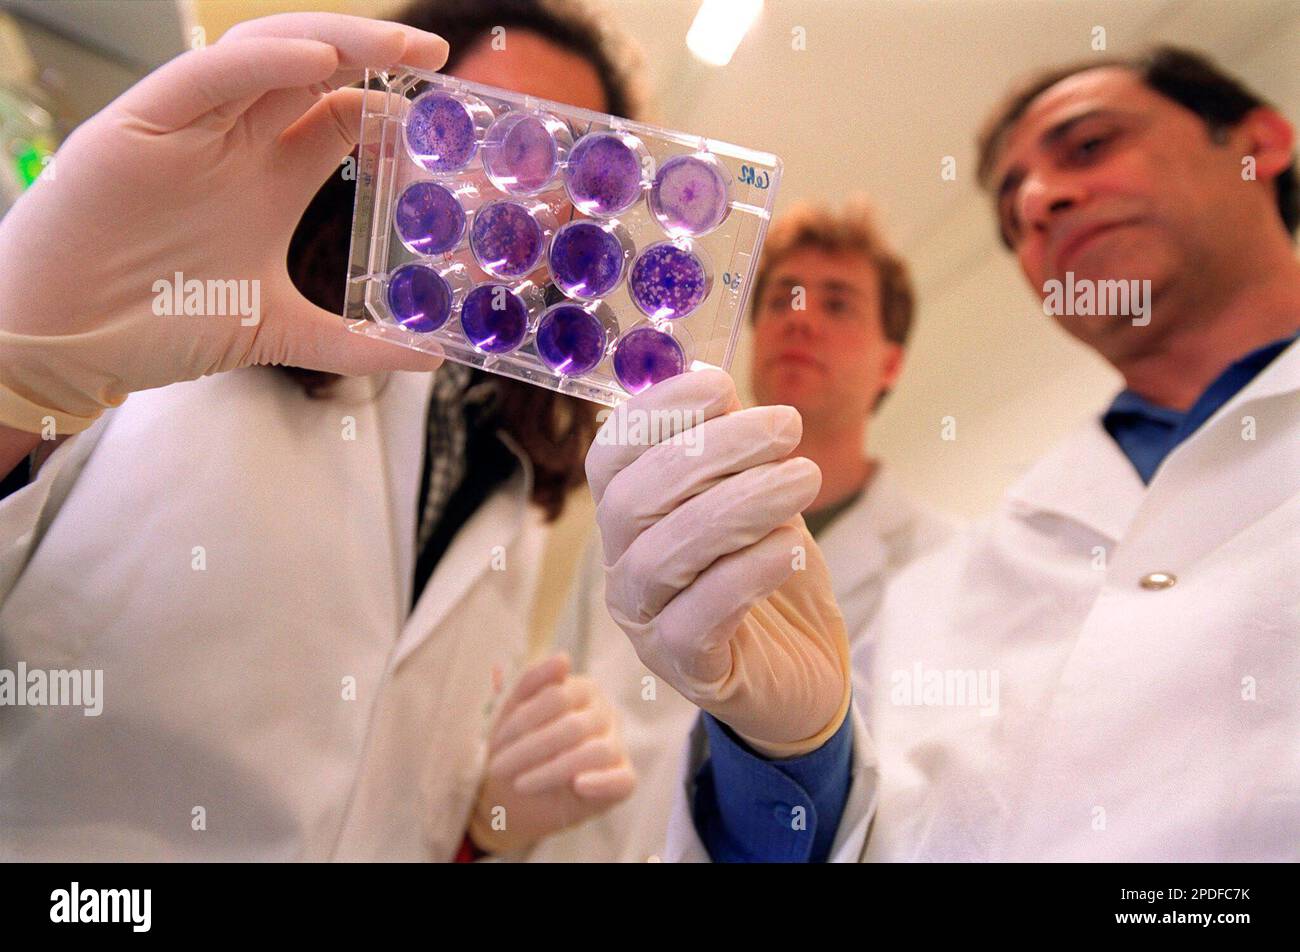 Professor Hussein Naim, right, Maddalena Palumbo, left, and Matthias  Liniger, behind, of the SARS research team of Swiss biotech company Berna  Biotech discuss samples containing the SARS virus in Berne, Switzerland, in